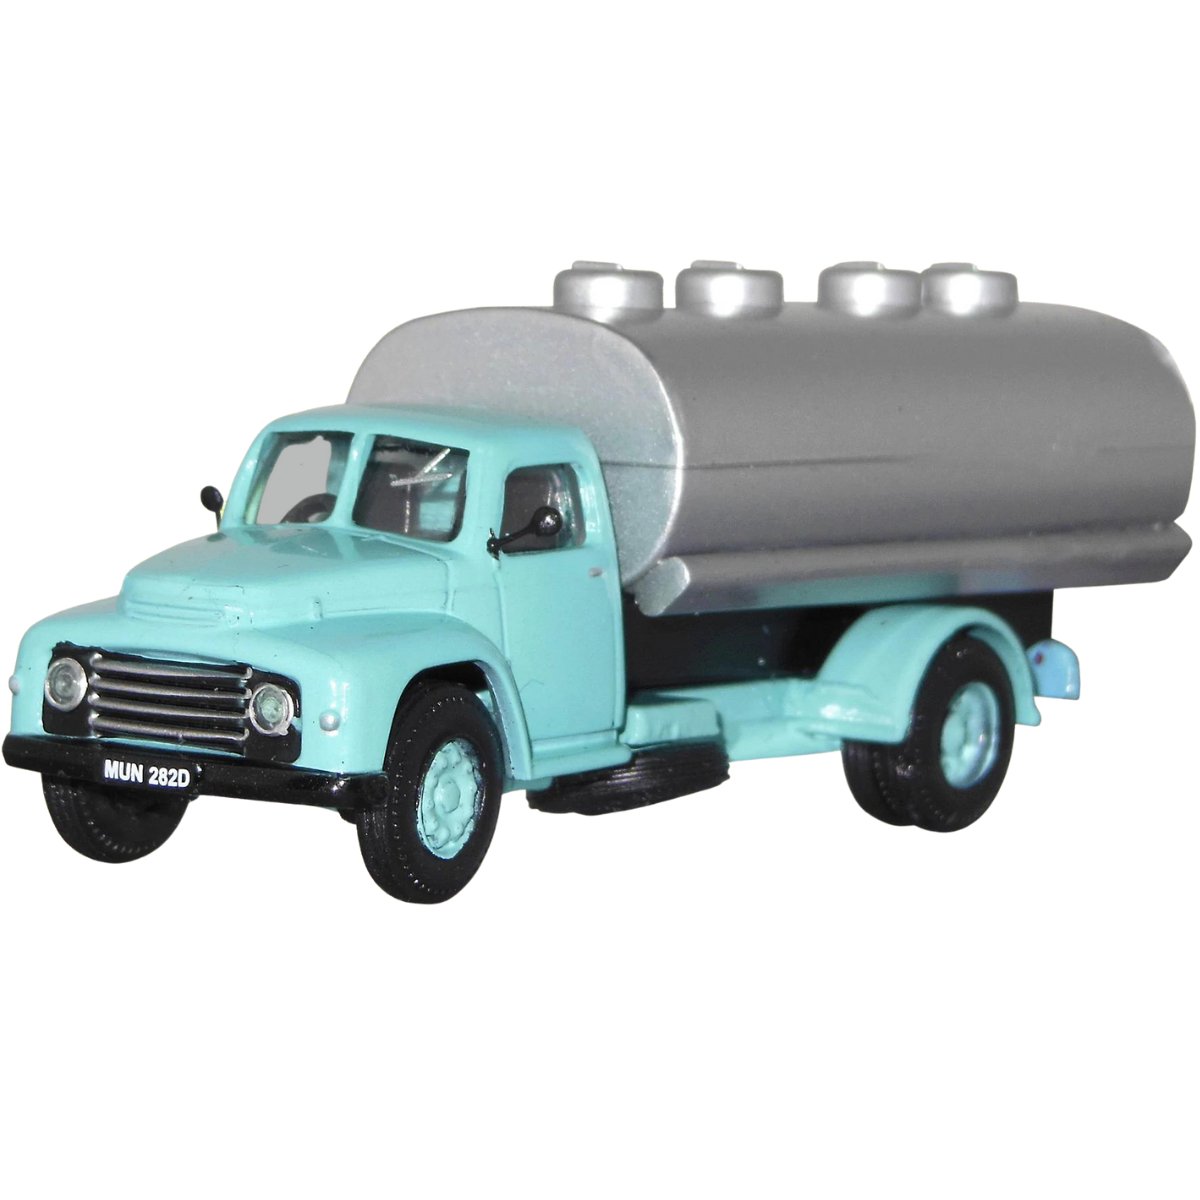 BT Models A012A Commer Superpoise Tanker Pale Blue/Silver - 1:76 Scale - Phillips Hobbies